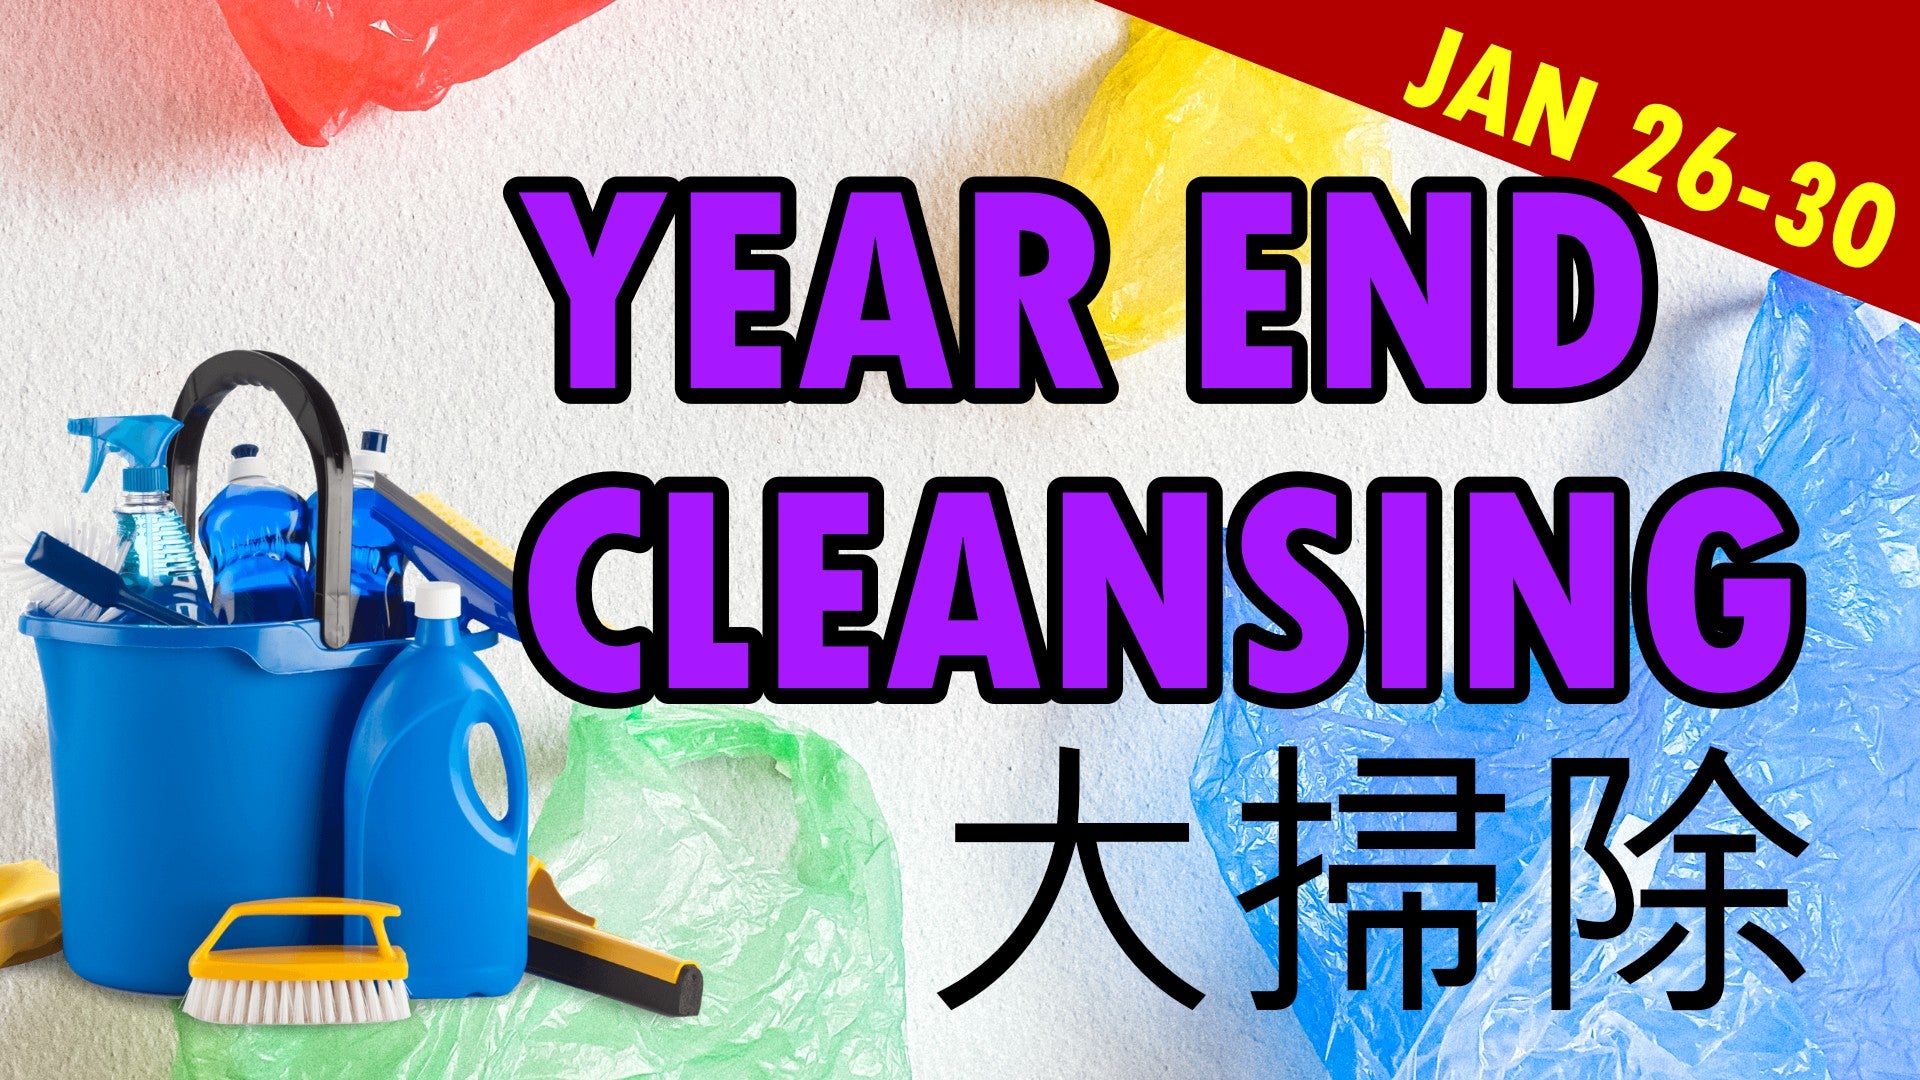 
          Lunar Year End - Cleansing Guide
        